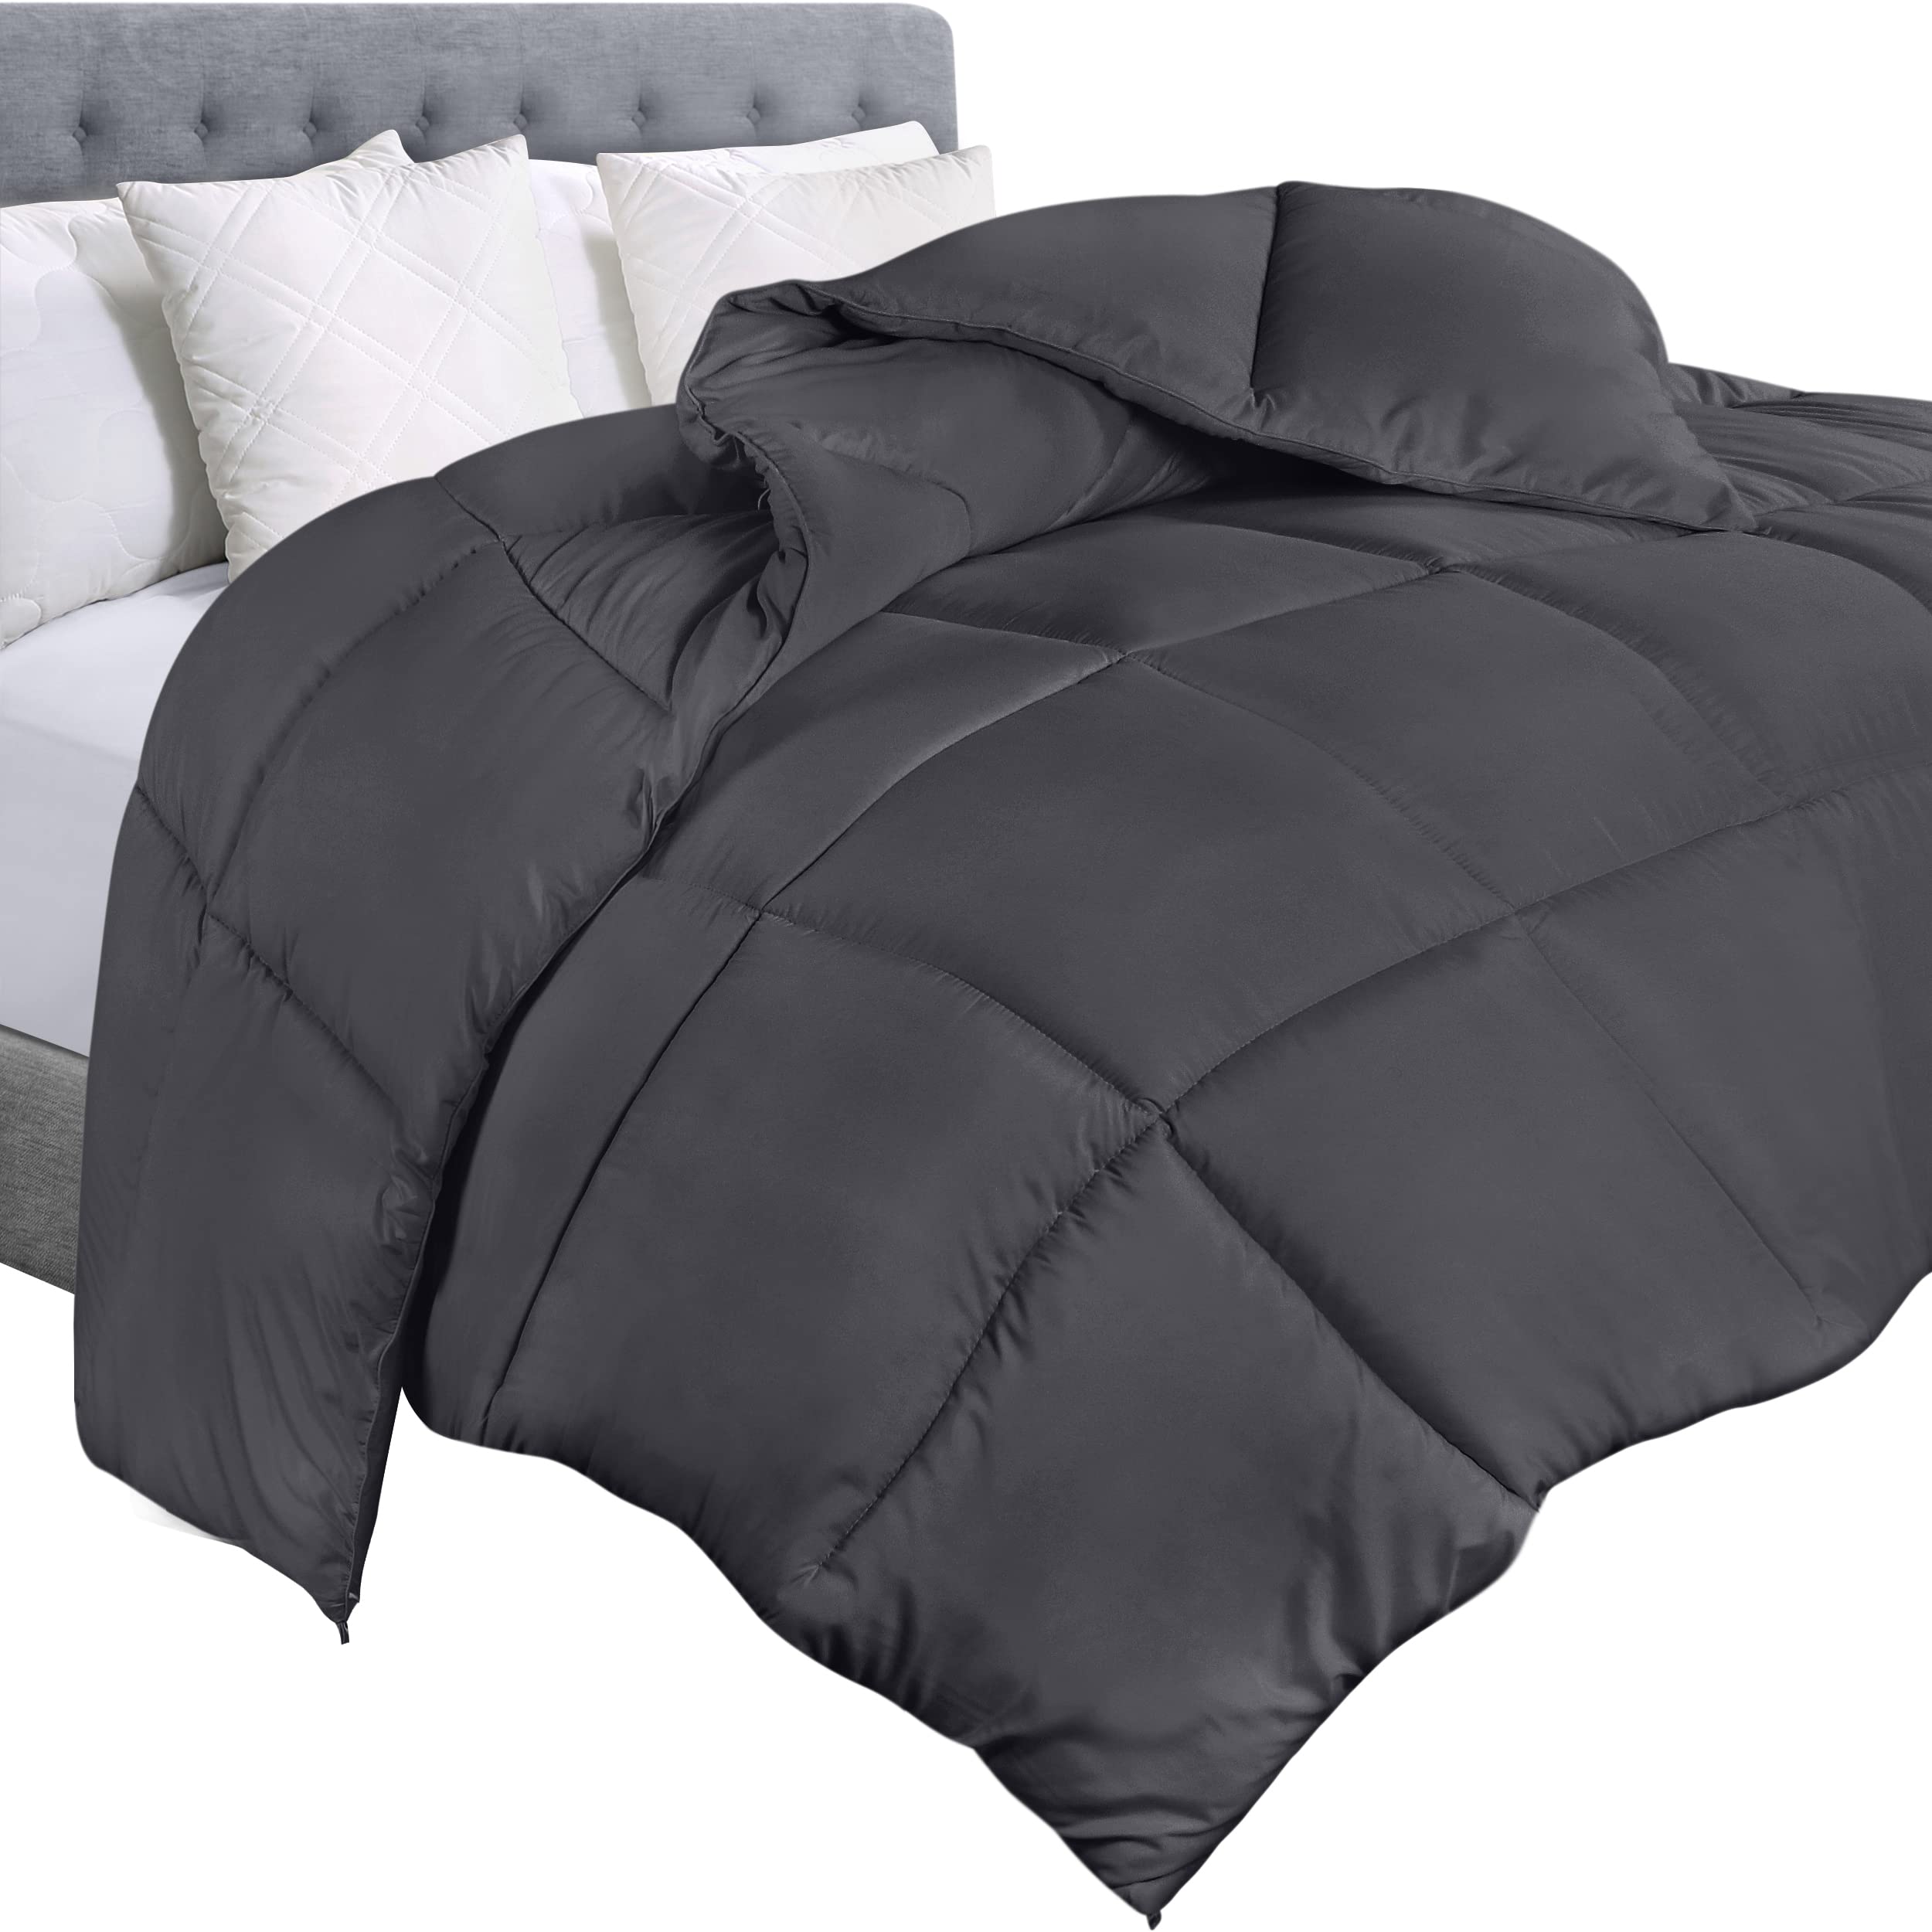 Book Cover Utopia Bedding Comforter Duvet Insert - Quilted Comforter with Corner Tabs - Box Stitched Down Alternative Comforter (Twin, Grey)